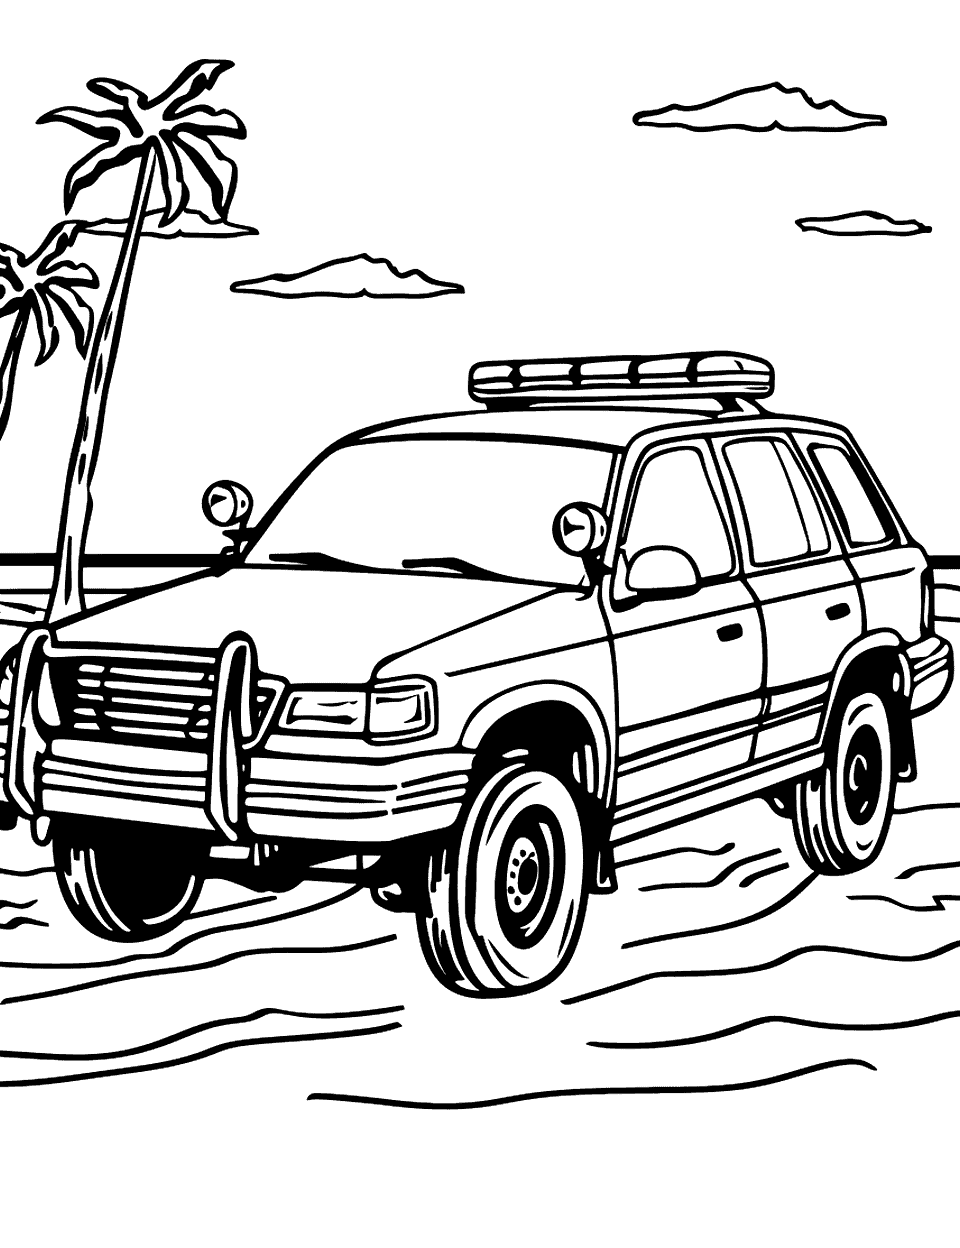 Beach Patrol Police Car Coloring Page - A police SUV patrolling a sunny beach.